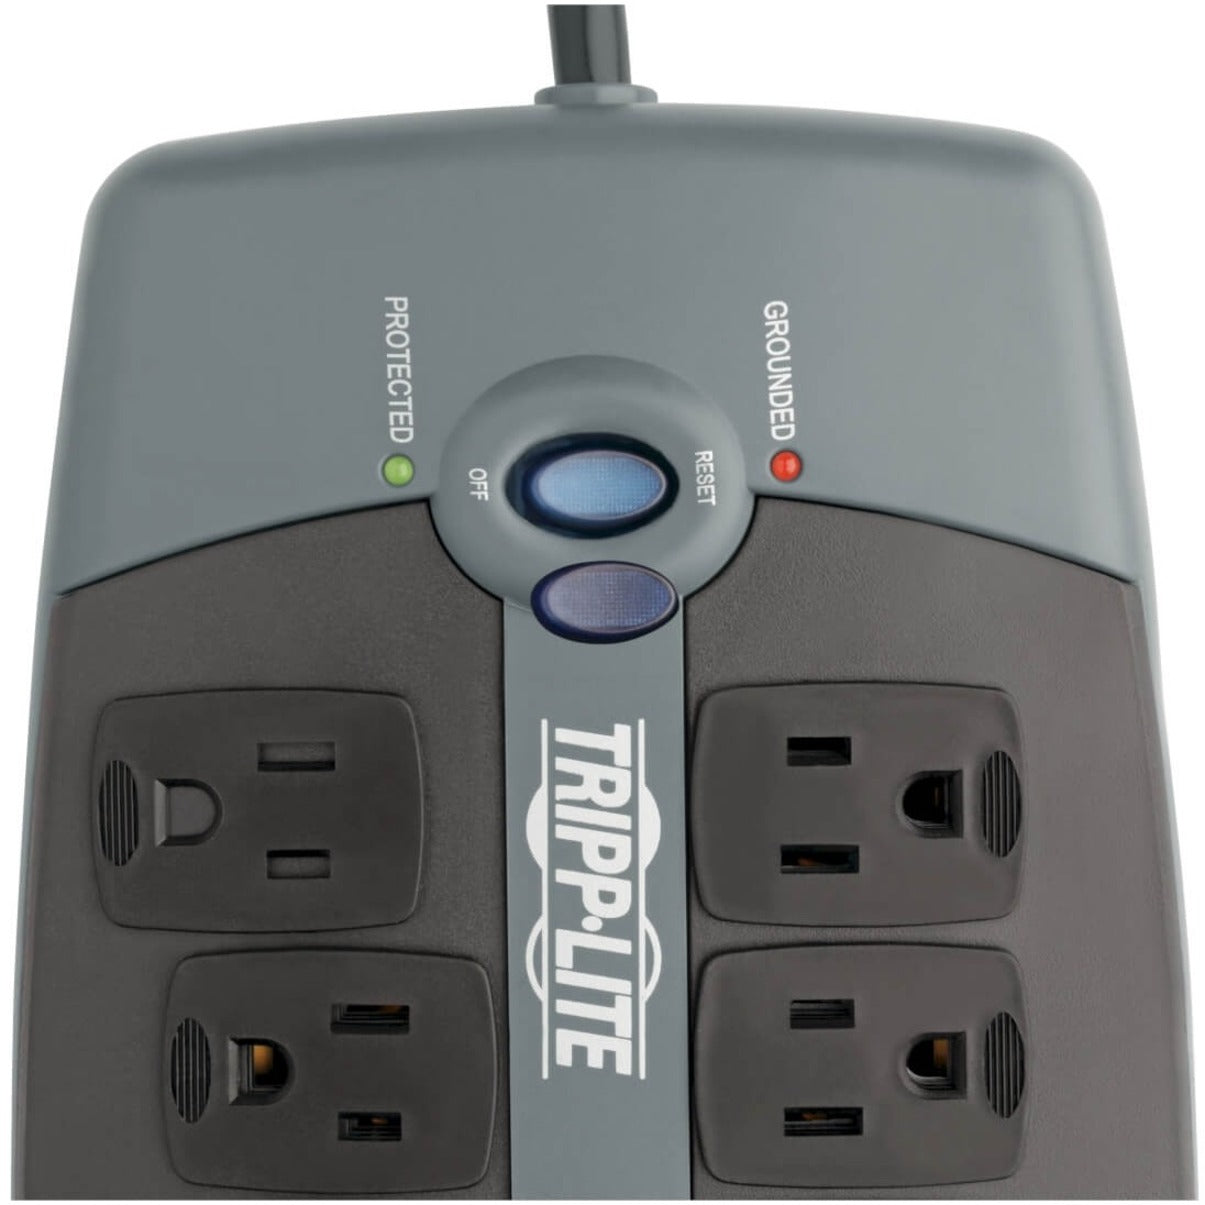 Tripp Lite Protect It! 10-Outlet Surge Protector 8 ft. (2.43 m) Cord 3345 Joules Tel/Modem/Coaxial Protection